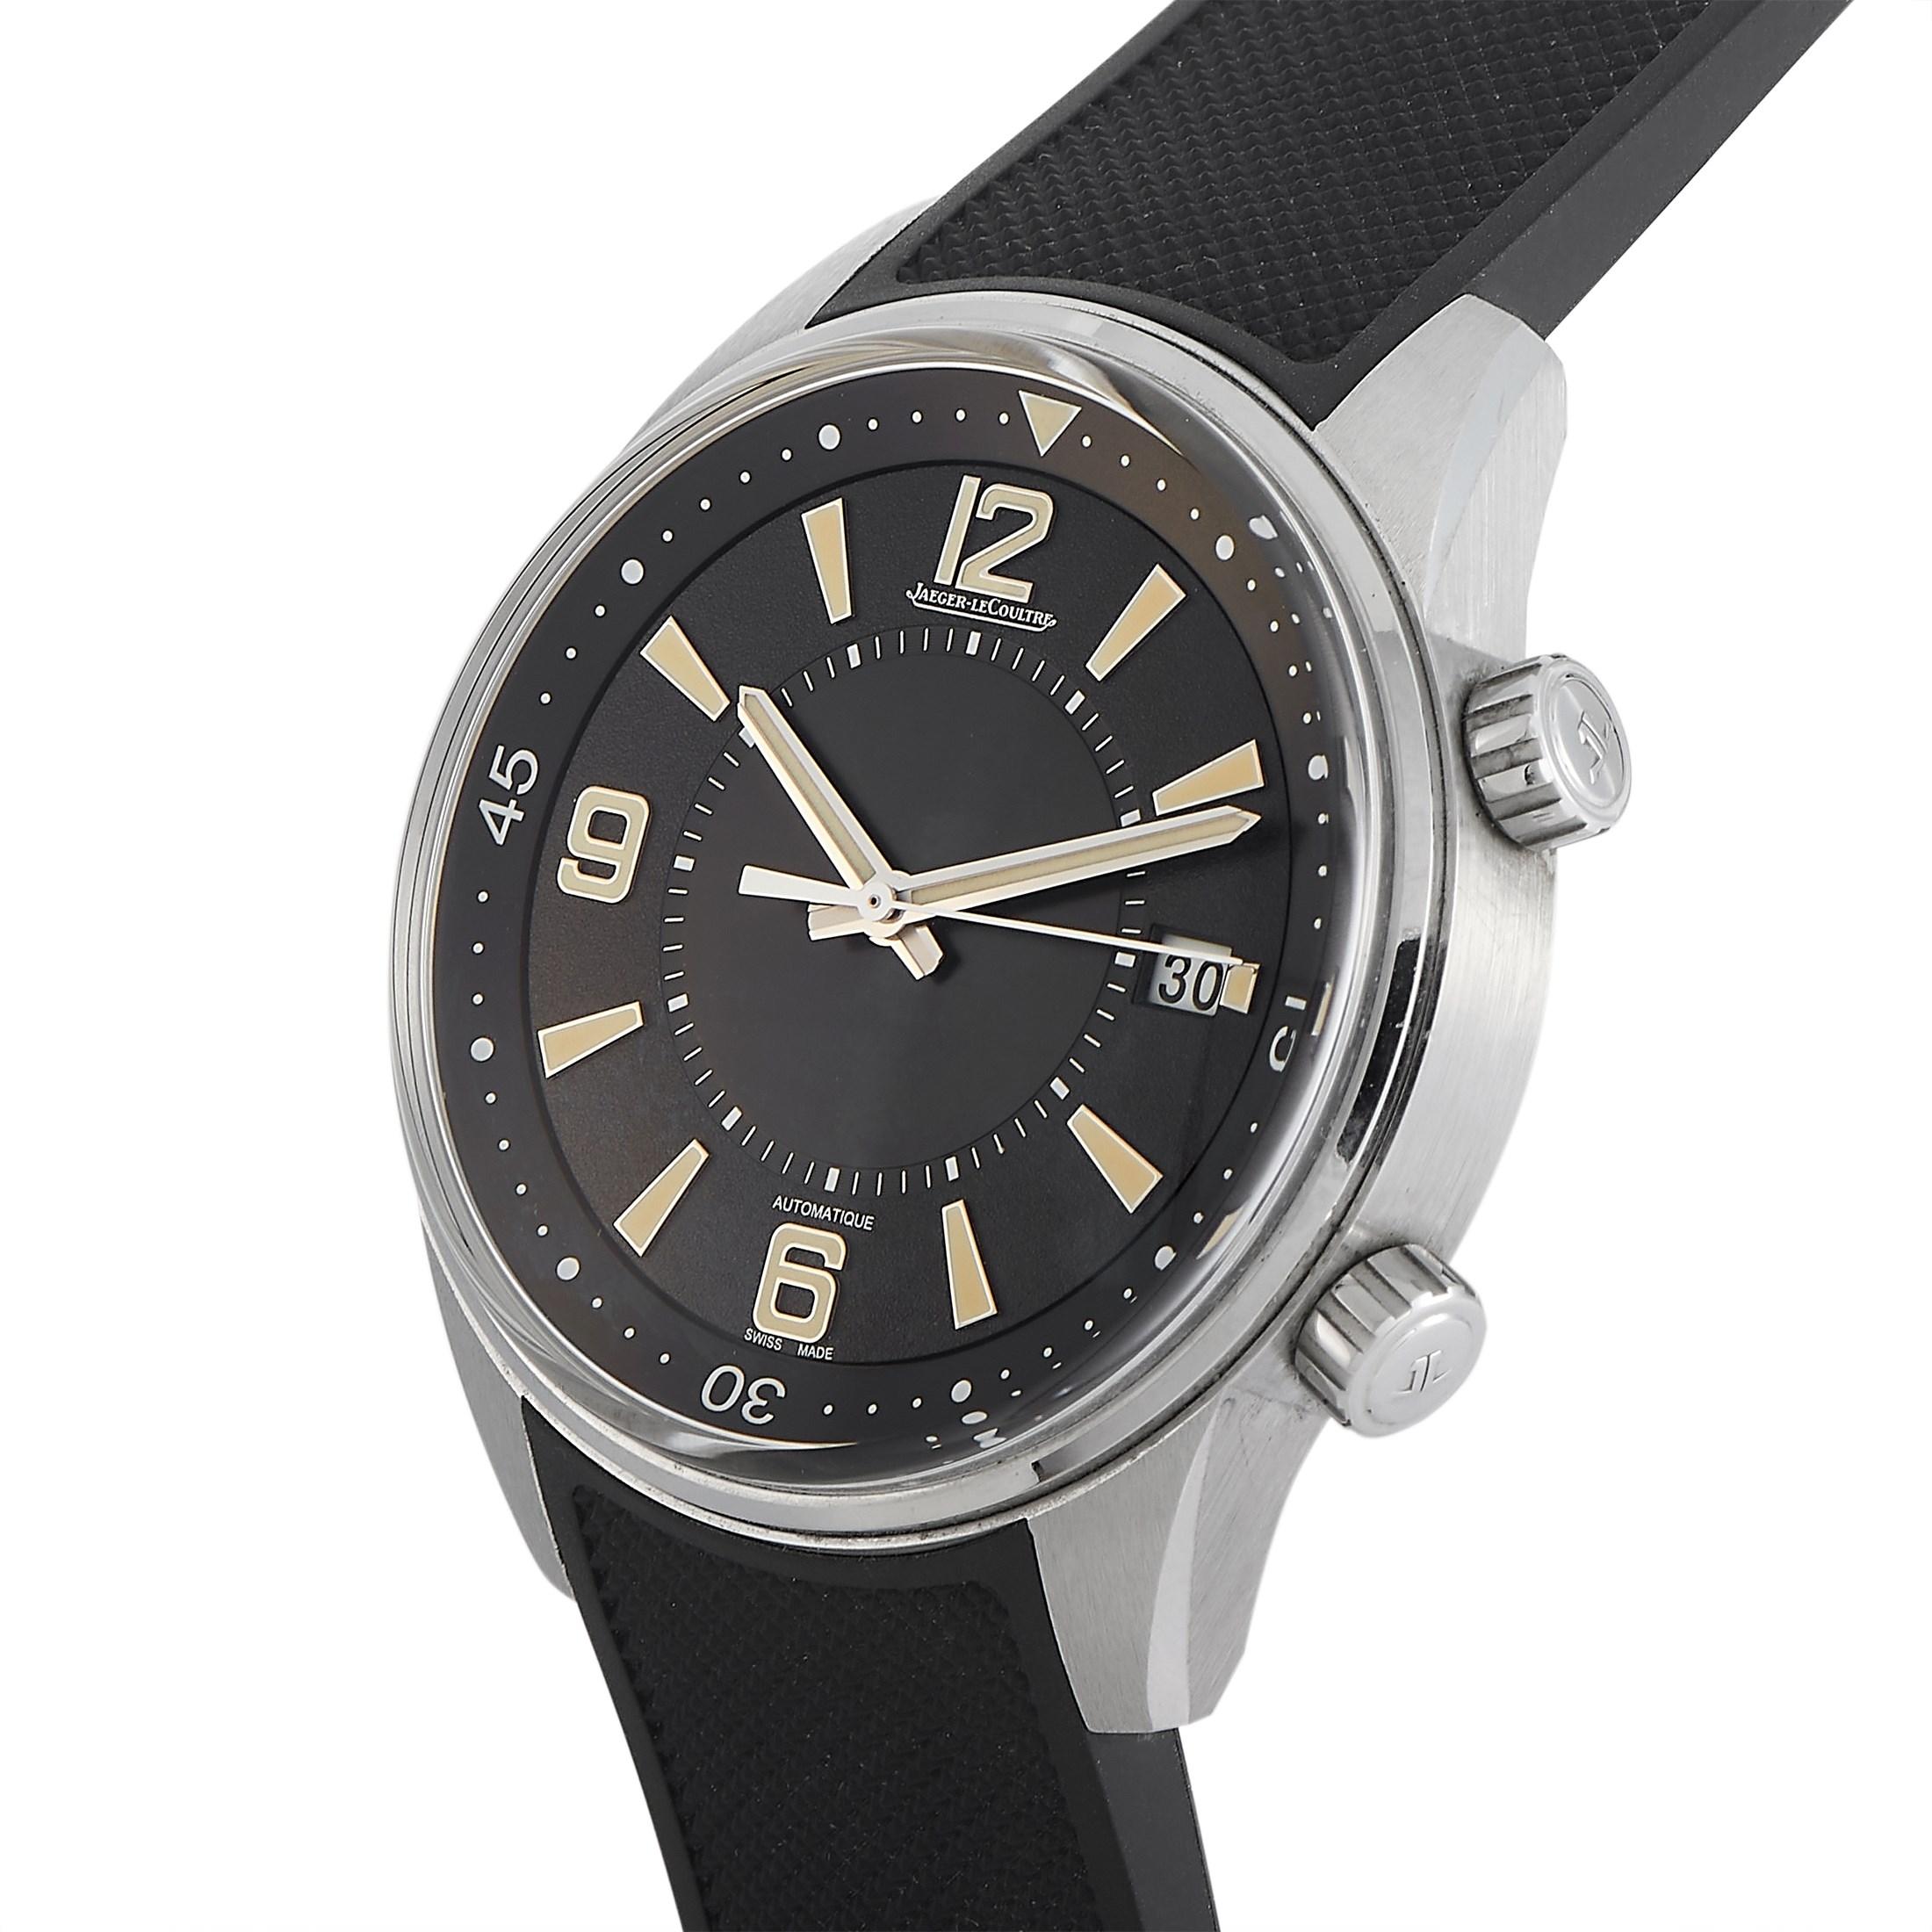 A modern watch inspired by the 1968 Memovox Polaris, the Jaeger Le Coultre Polaris Date Automatic Watch 9068670 displays a certain elegance that won't go unnoticed. This timepiece features a 42mm brushed and polished stainless steel case and a black